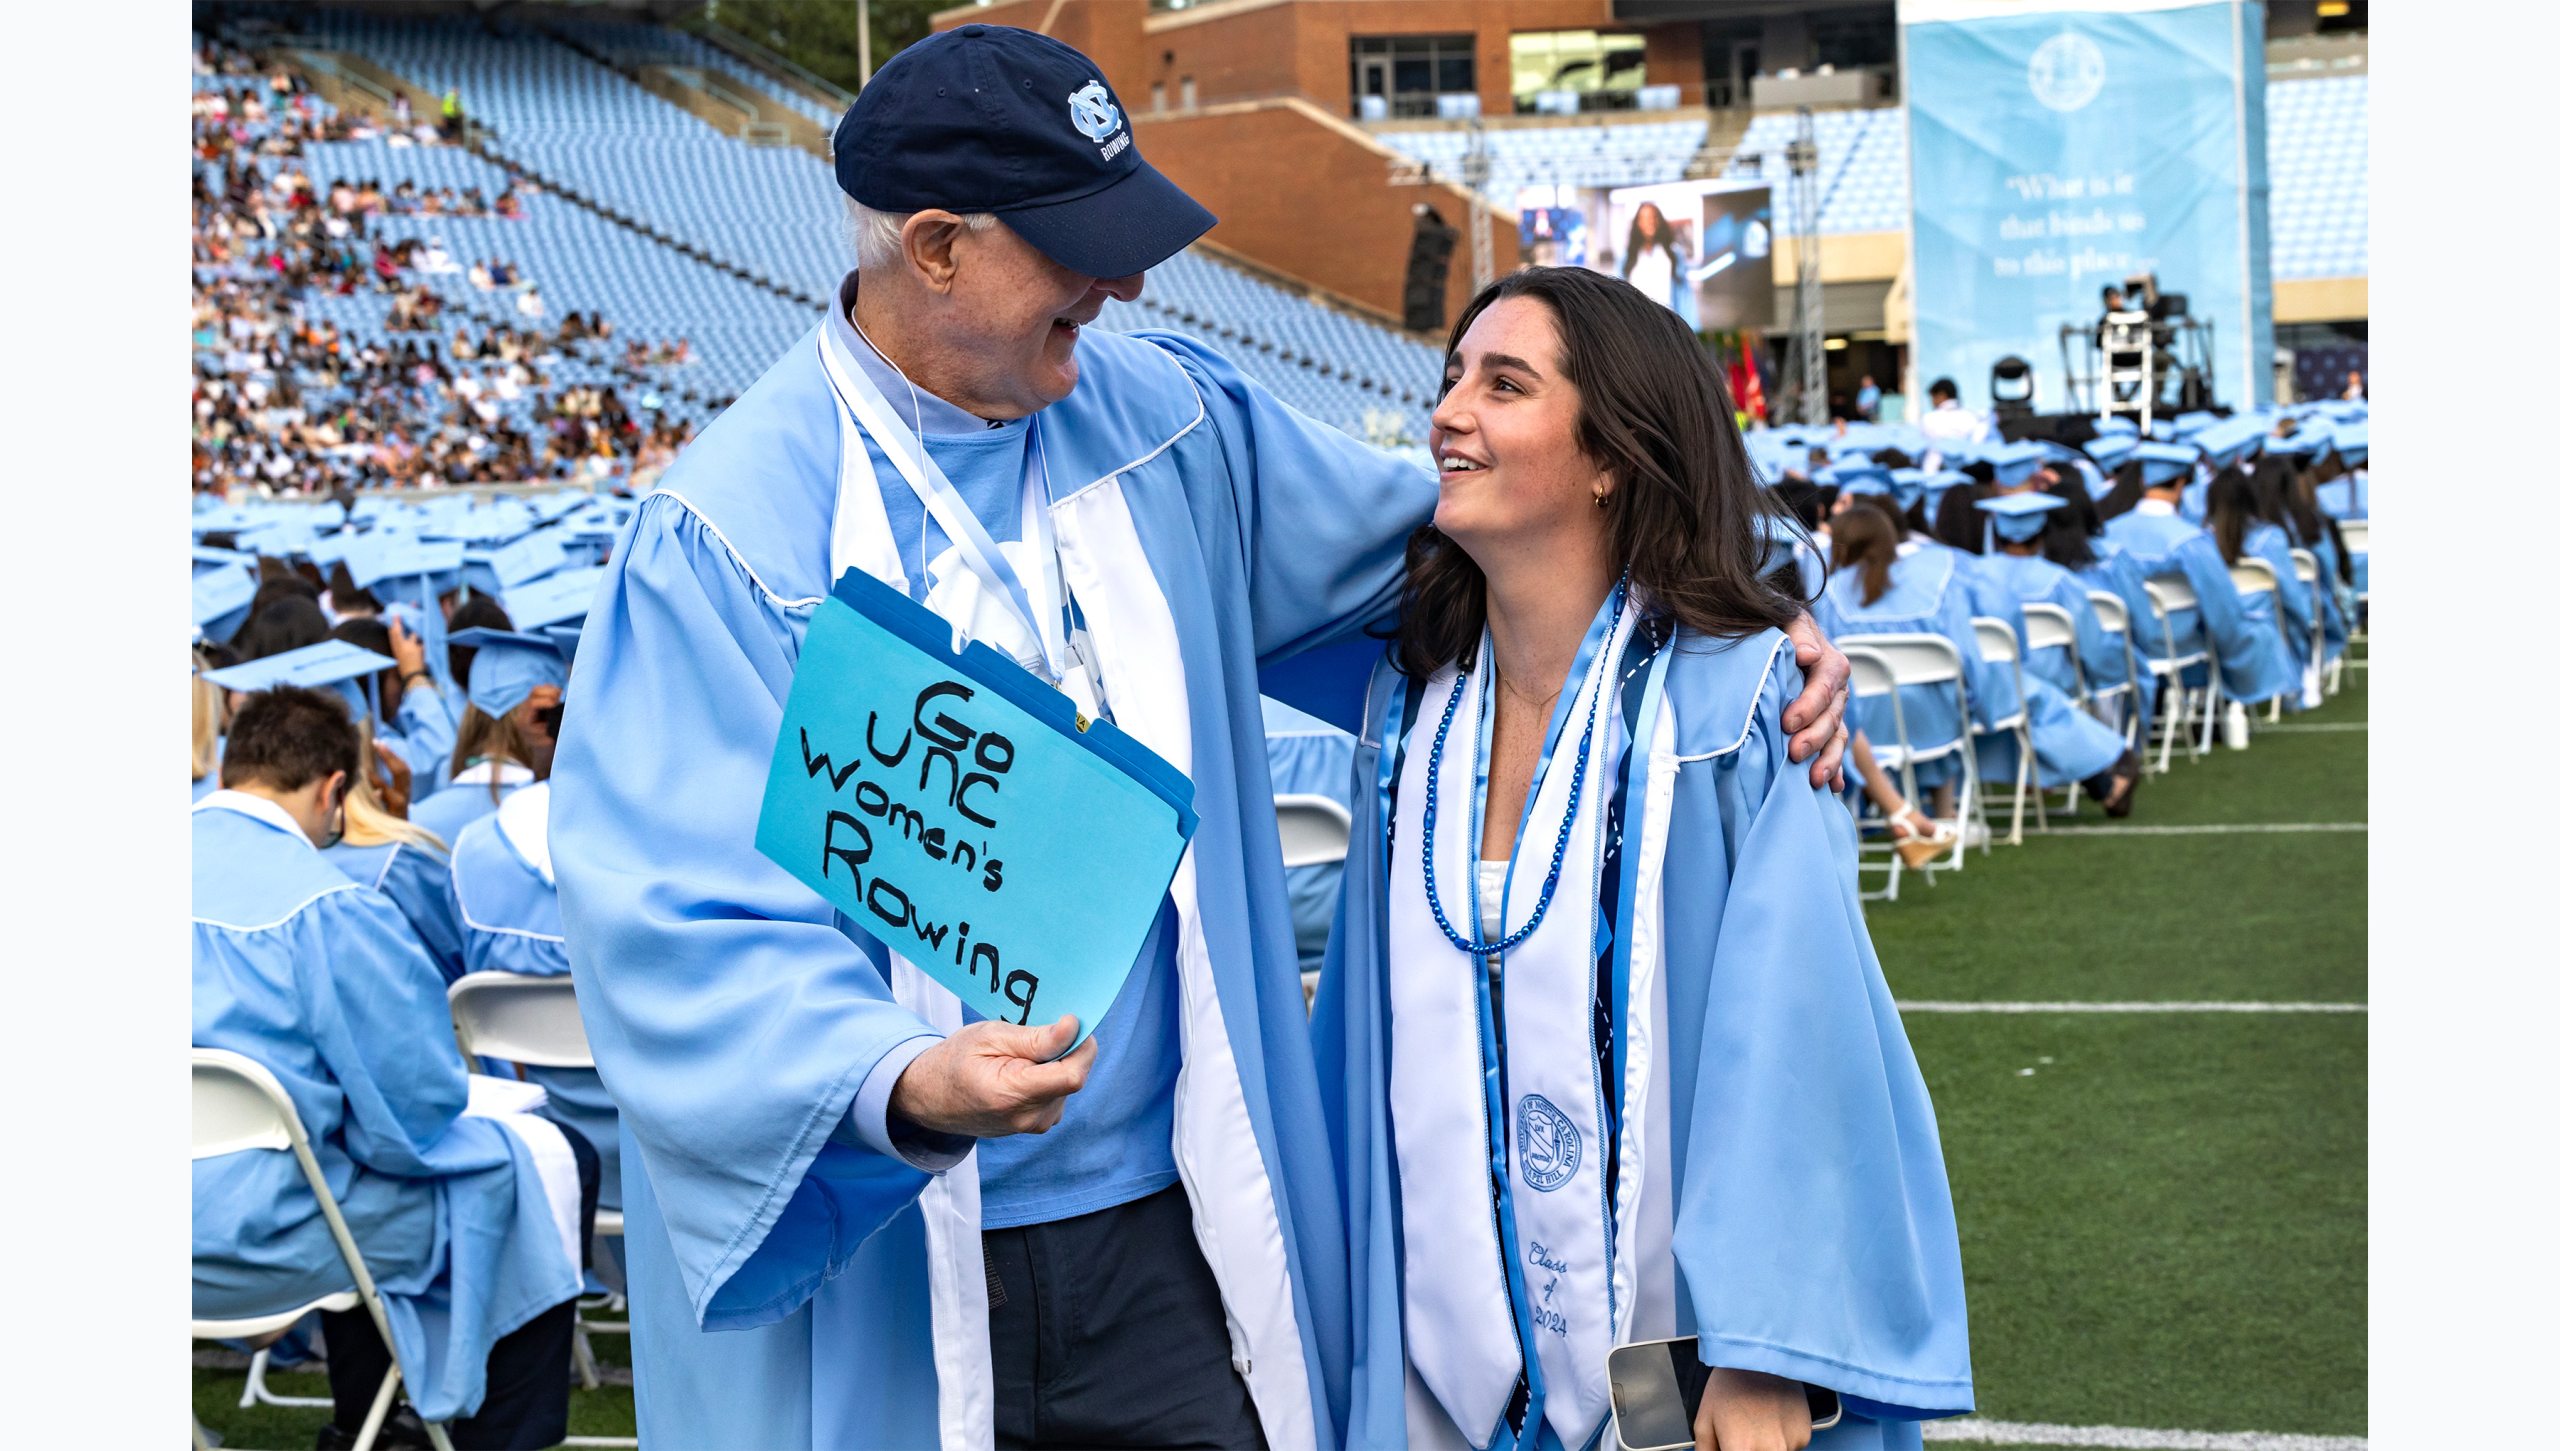 Graduate and adult smile at each other on field before ceremony